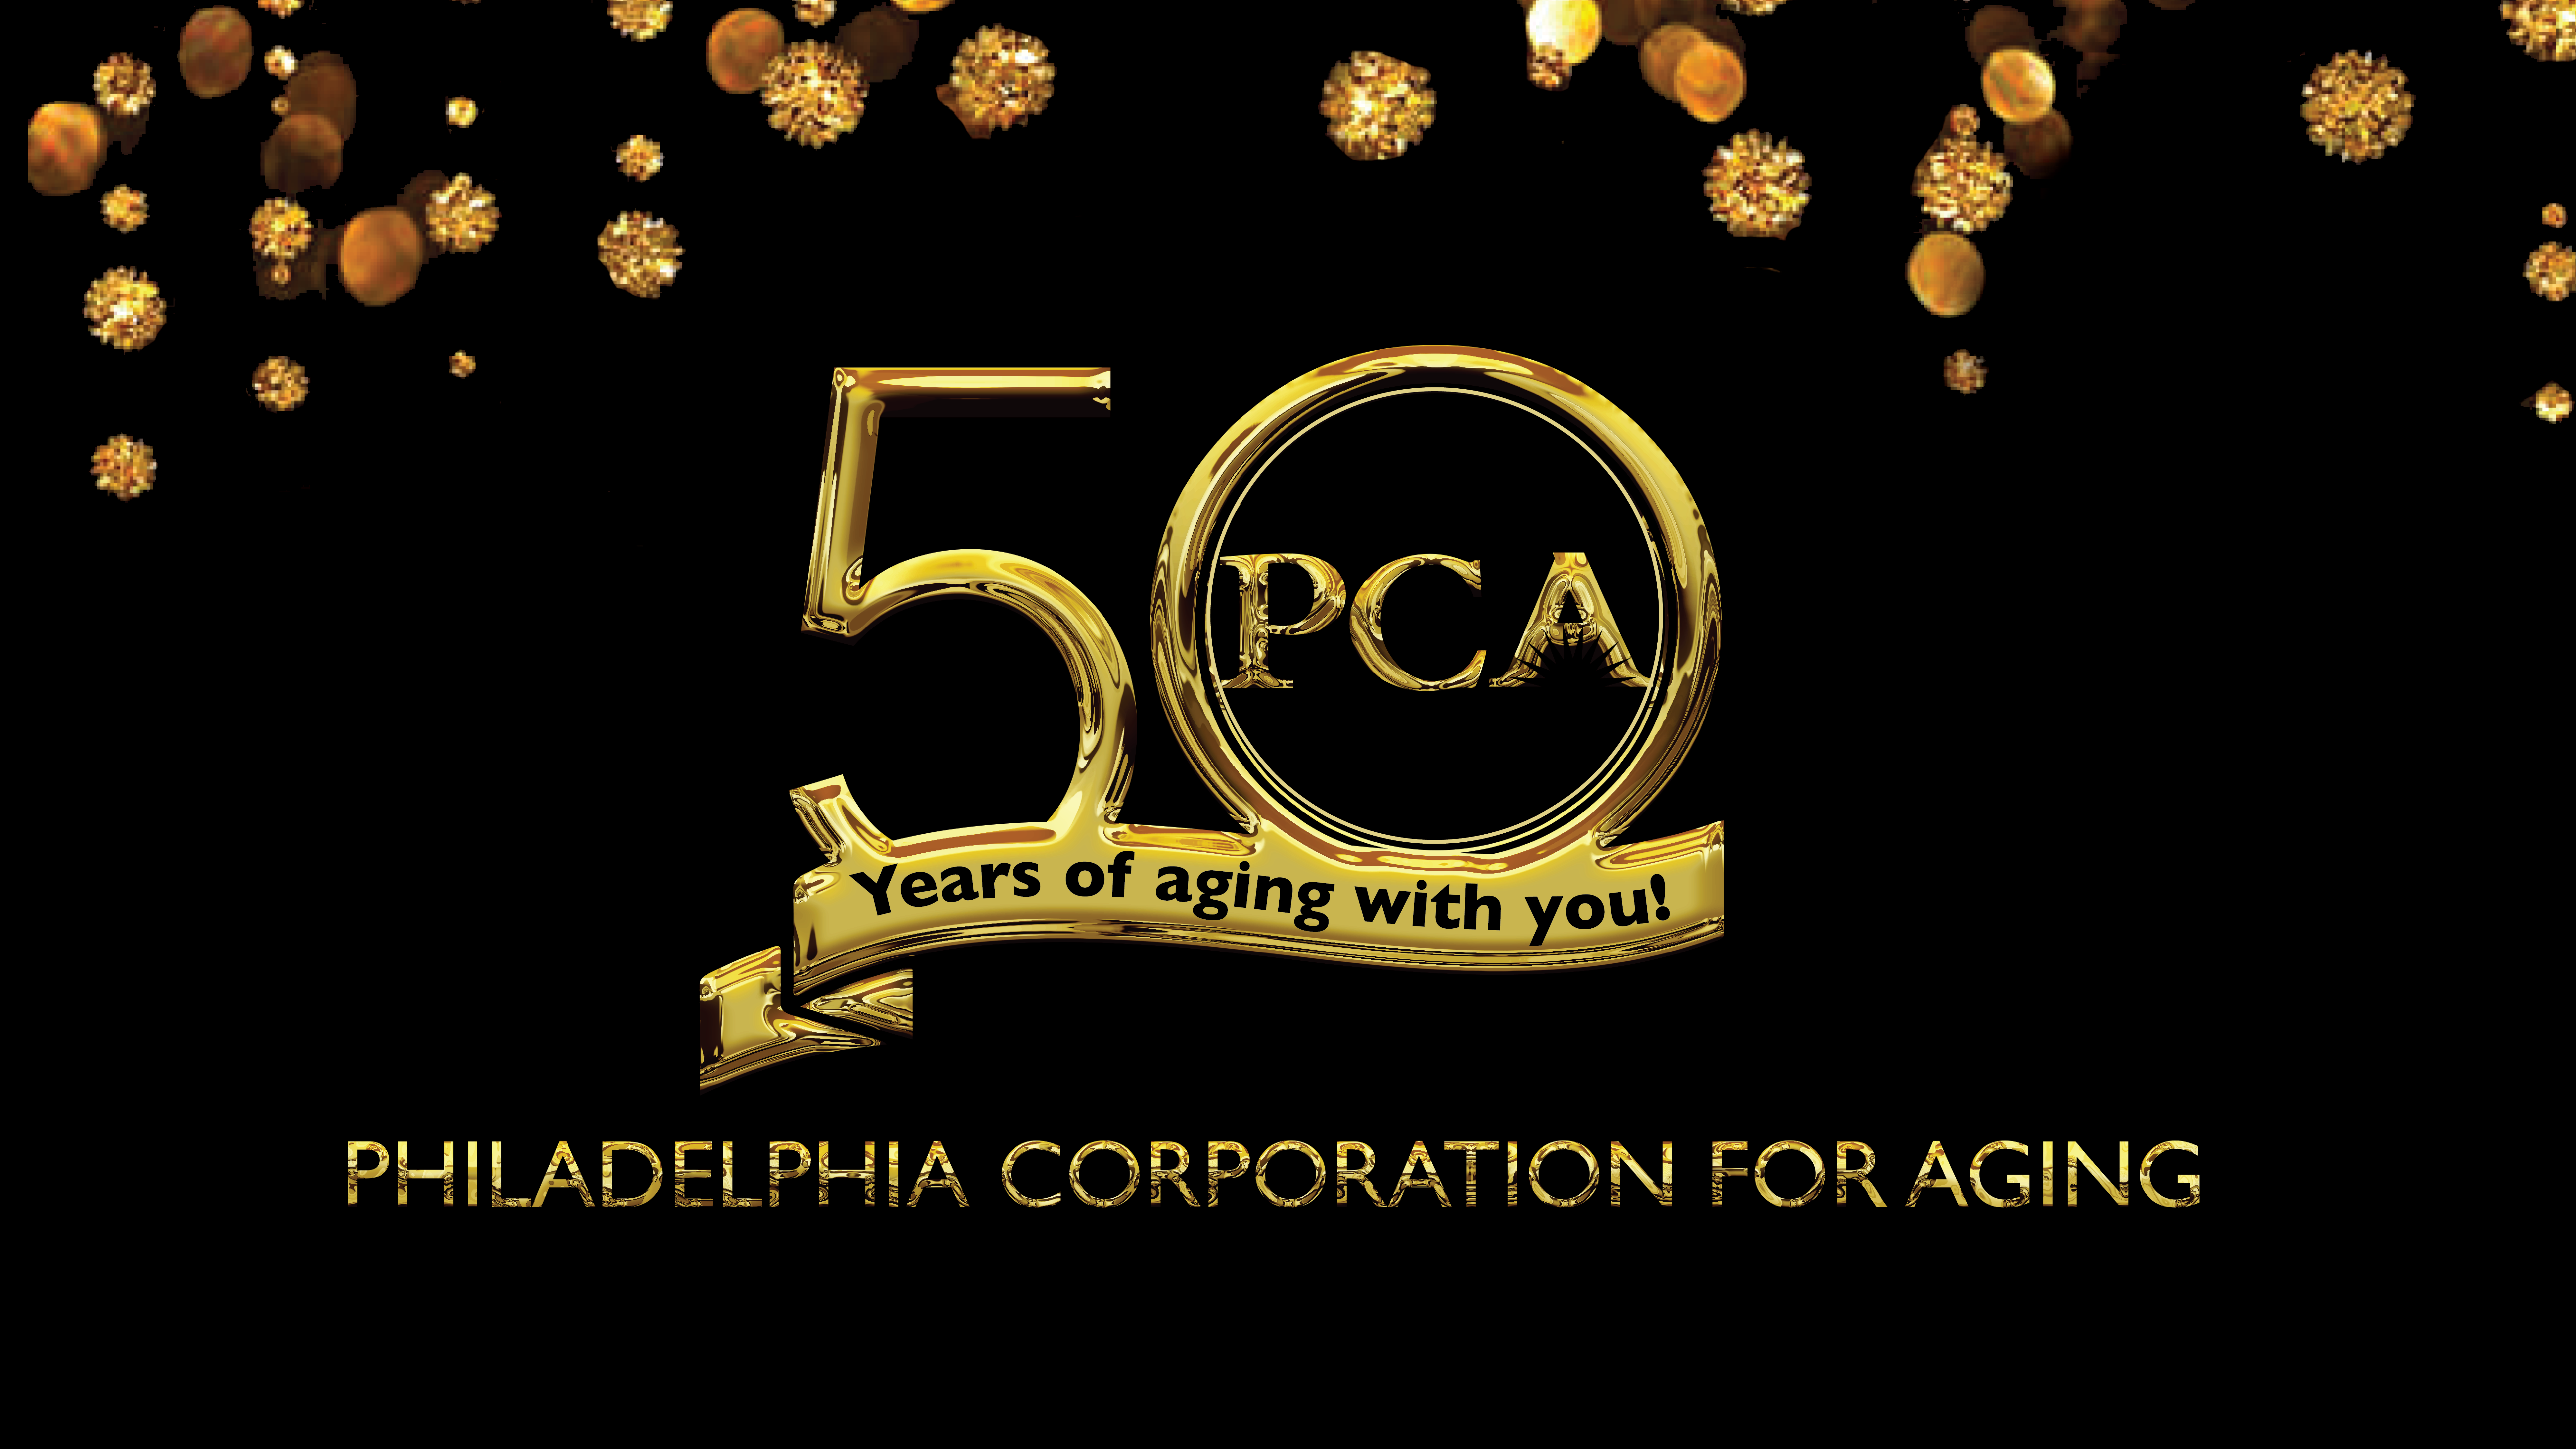 PCA’s “50 Years of Aging with You!” Celebration, presented by Independence Blue Cross